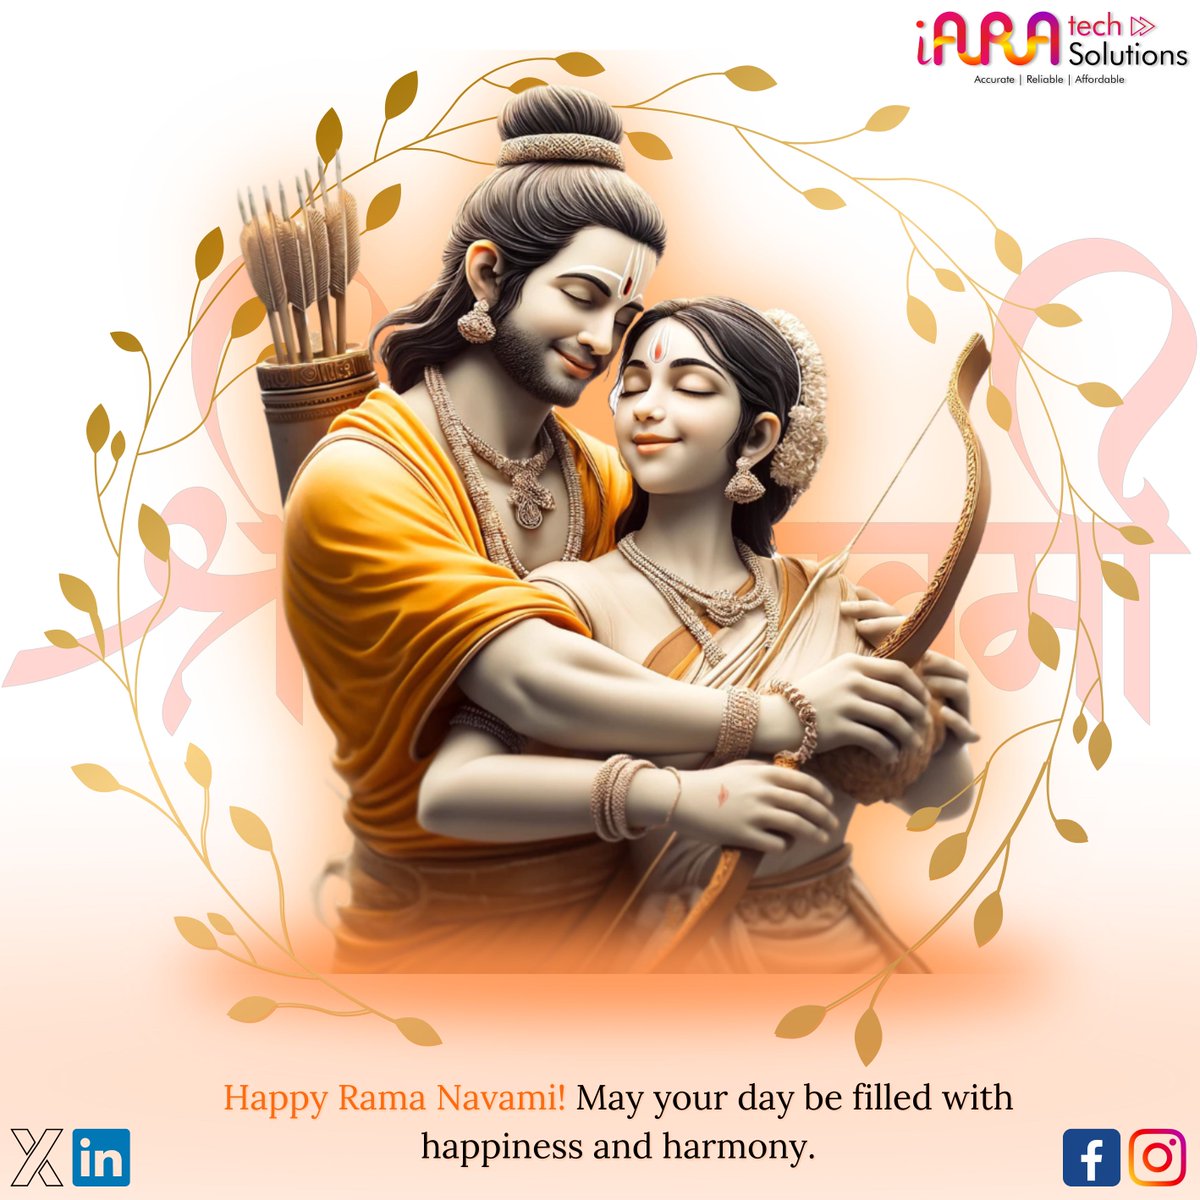 Happy Rama Navami, friends! 🎉 Let's embrace this special day with open hearts and grateful minds. May the divine grace of Lord Ram fill our lives with love, happiness, and abundance. Stay blessed and keep spreading kindness! 🙏✨ #RamaNavami #LordRam #Ram